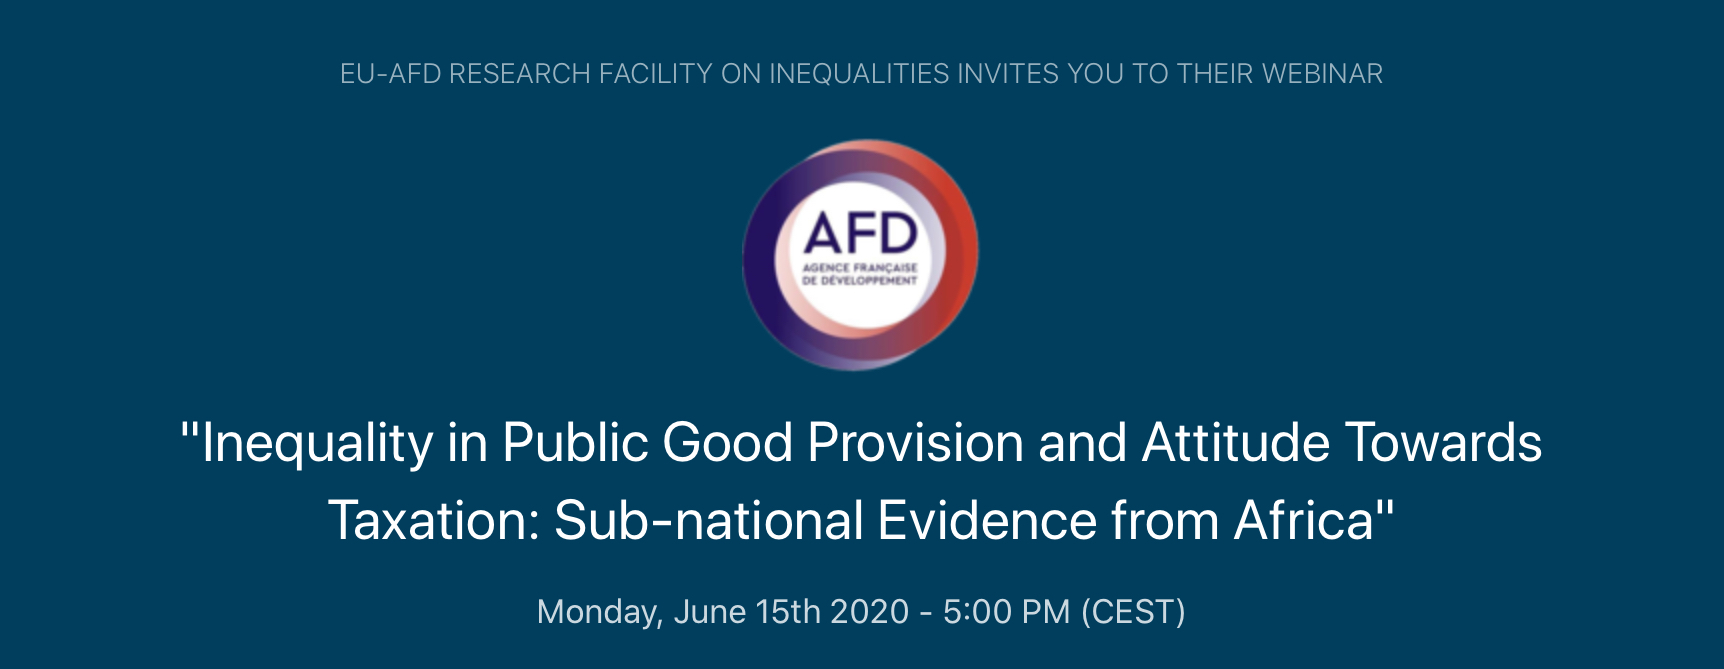 Webinar de l’EU-AFD Research Facility on Inequalities : « Inequality in Public Good Provision and Attitude Towards Taxation: Sub-national Evidence from Africa »